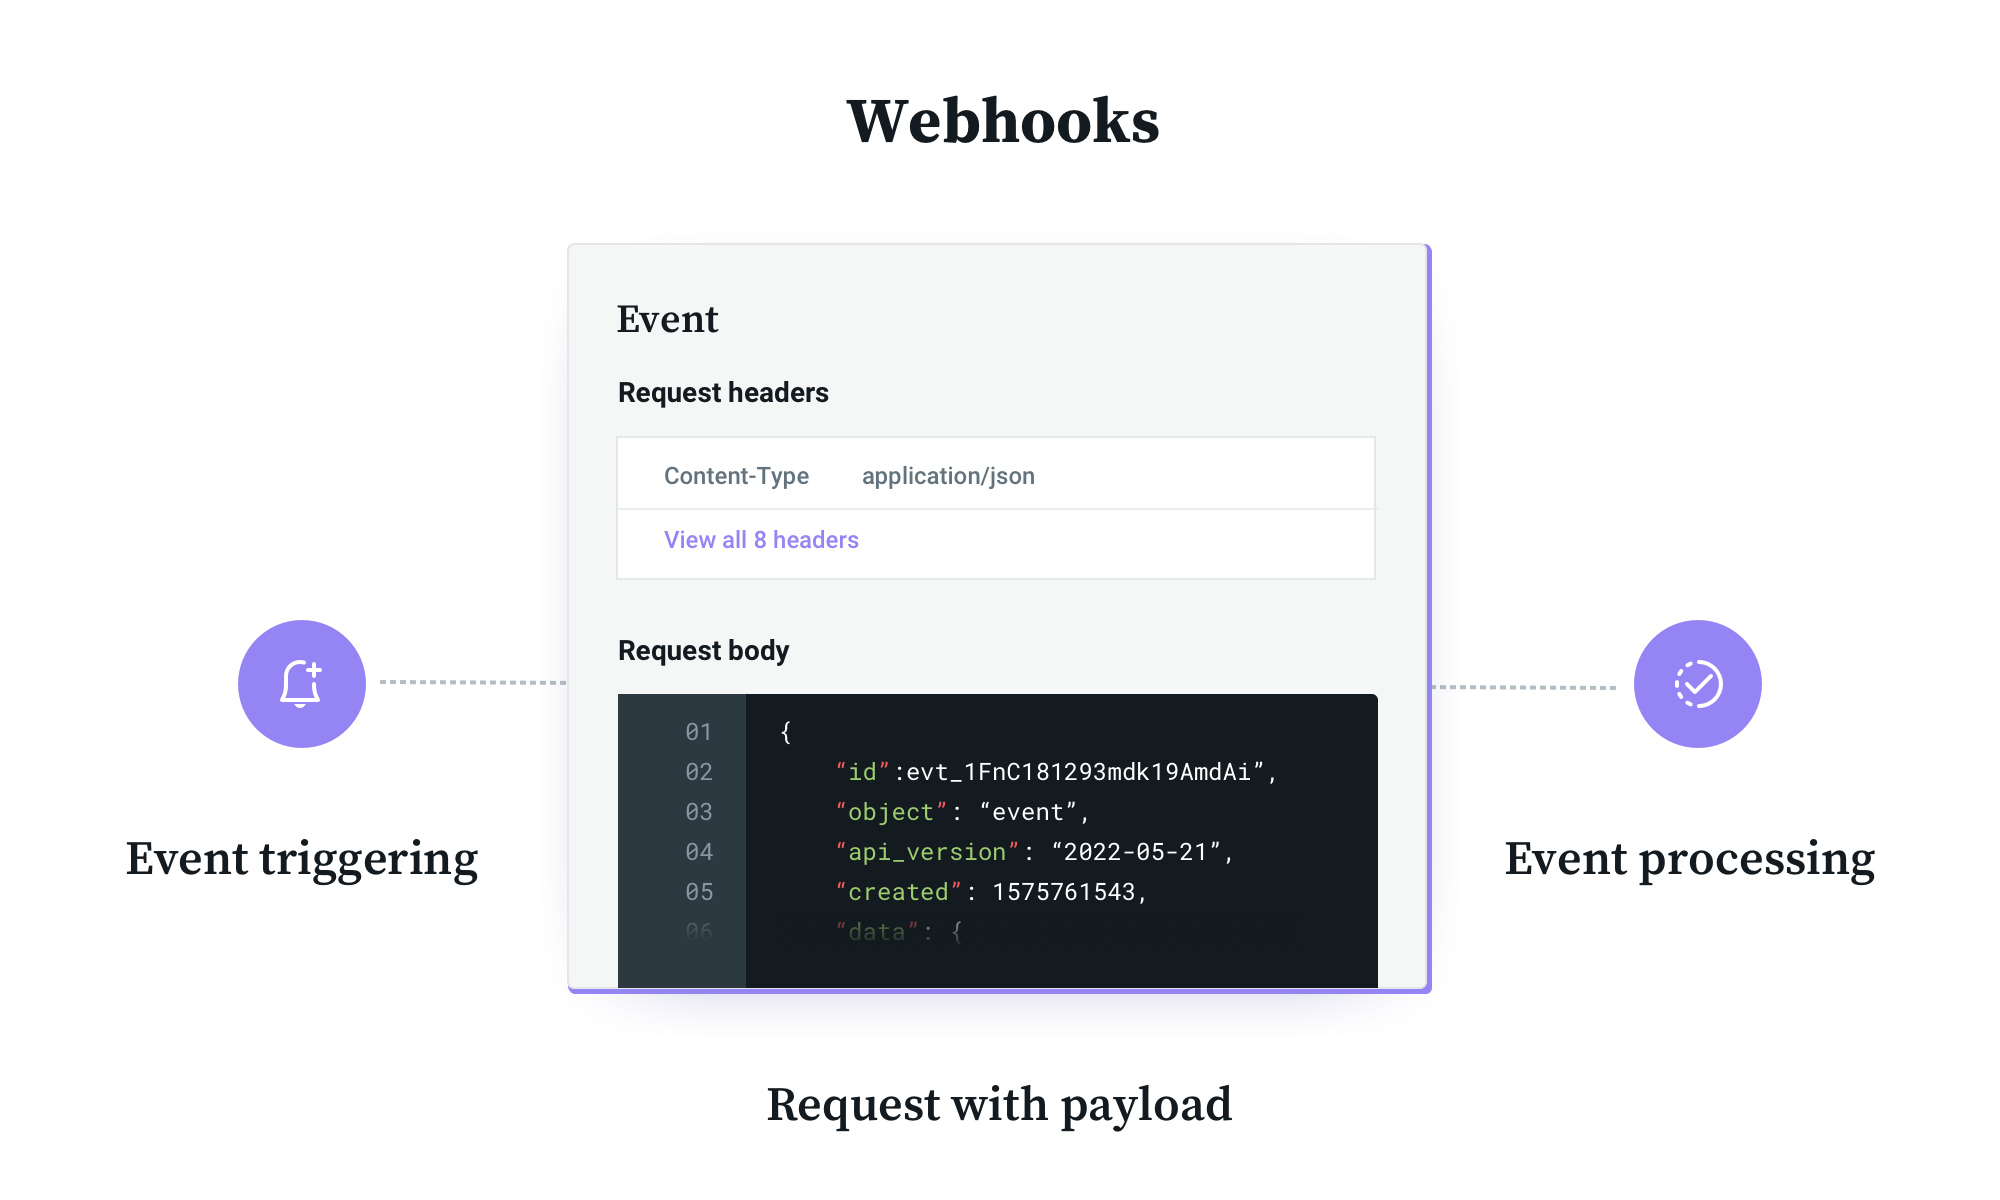 Diagram showing request with webhook payload